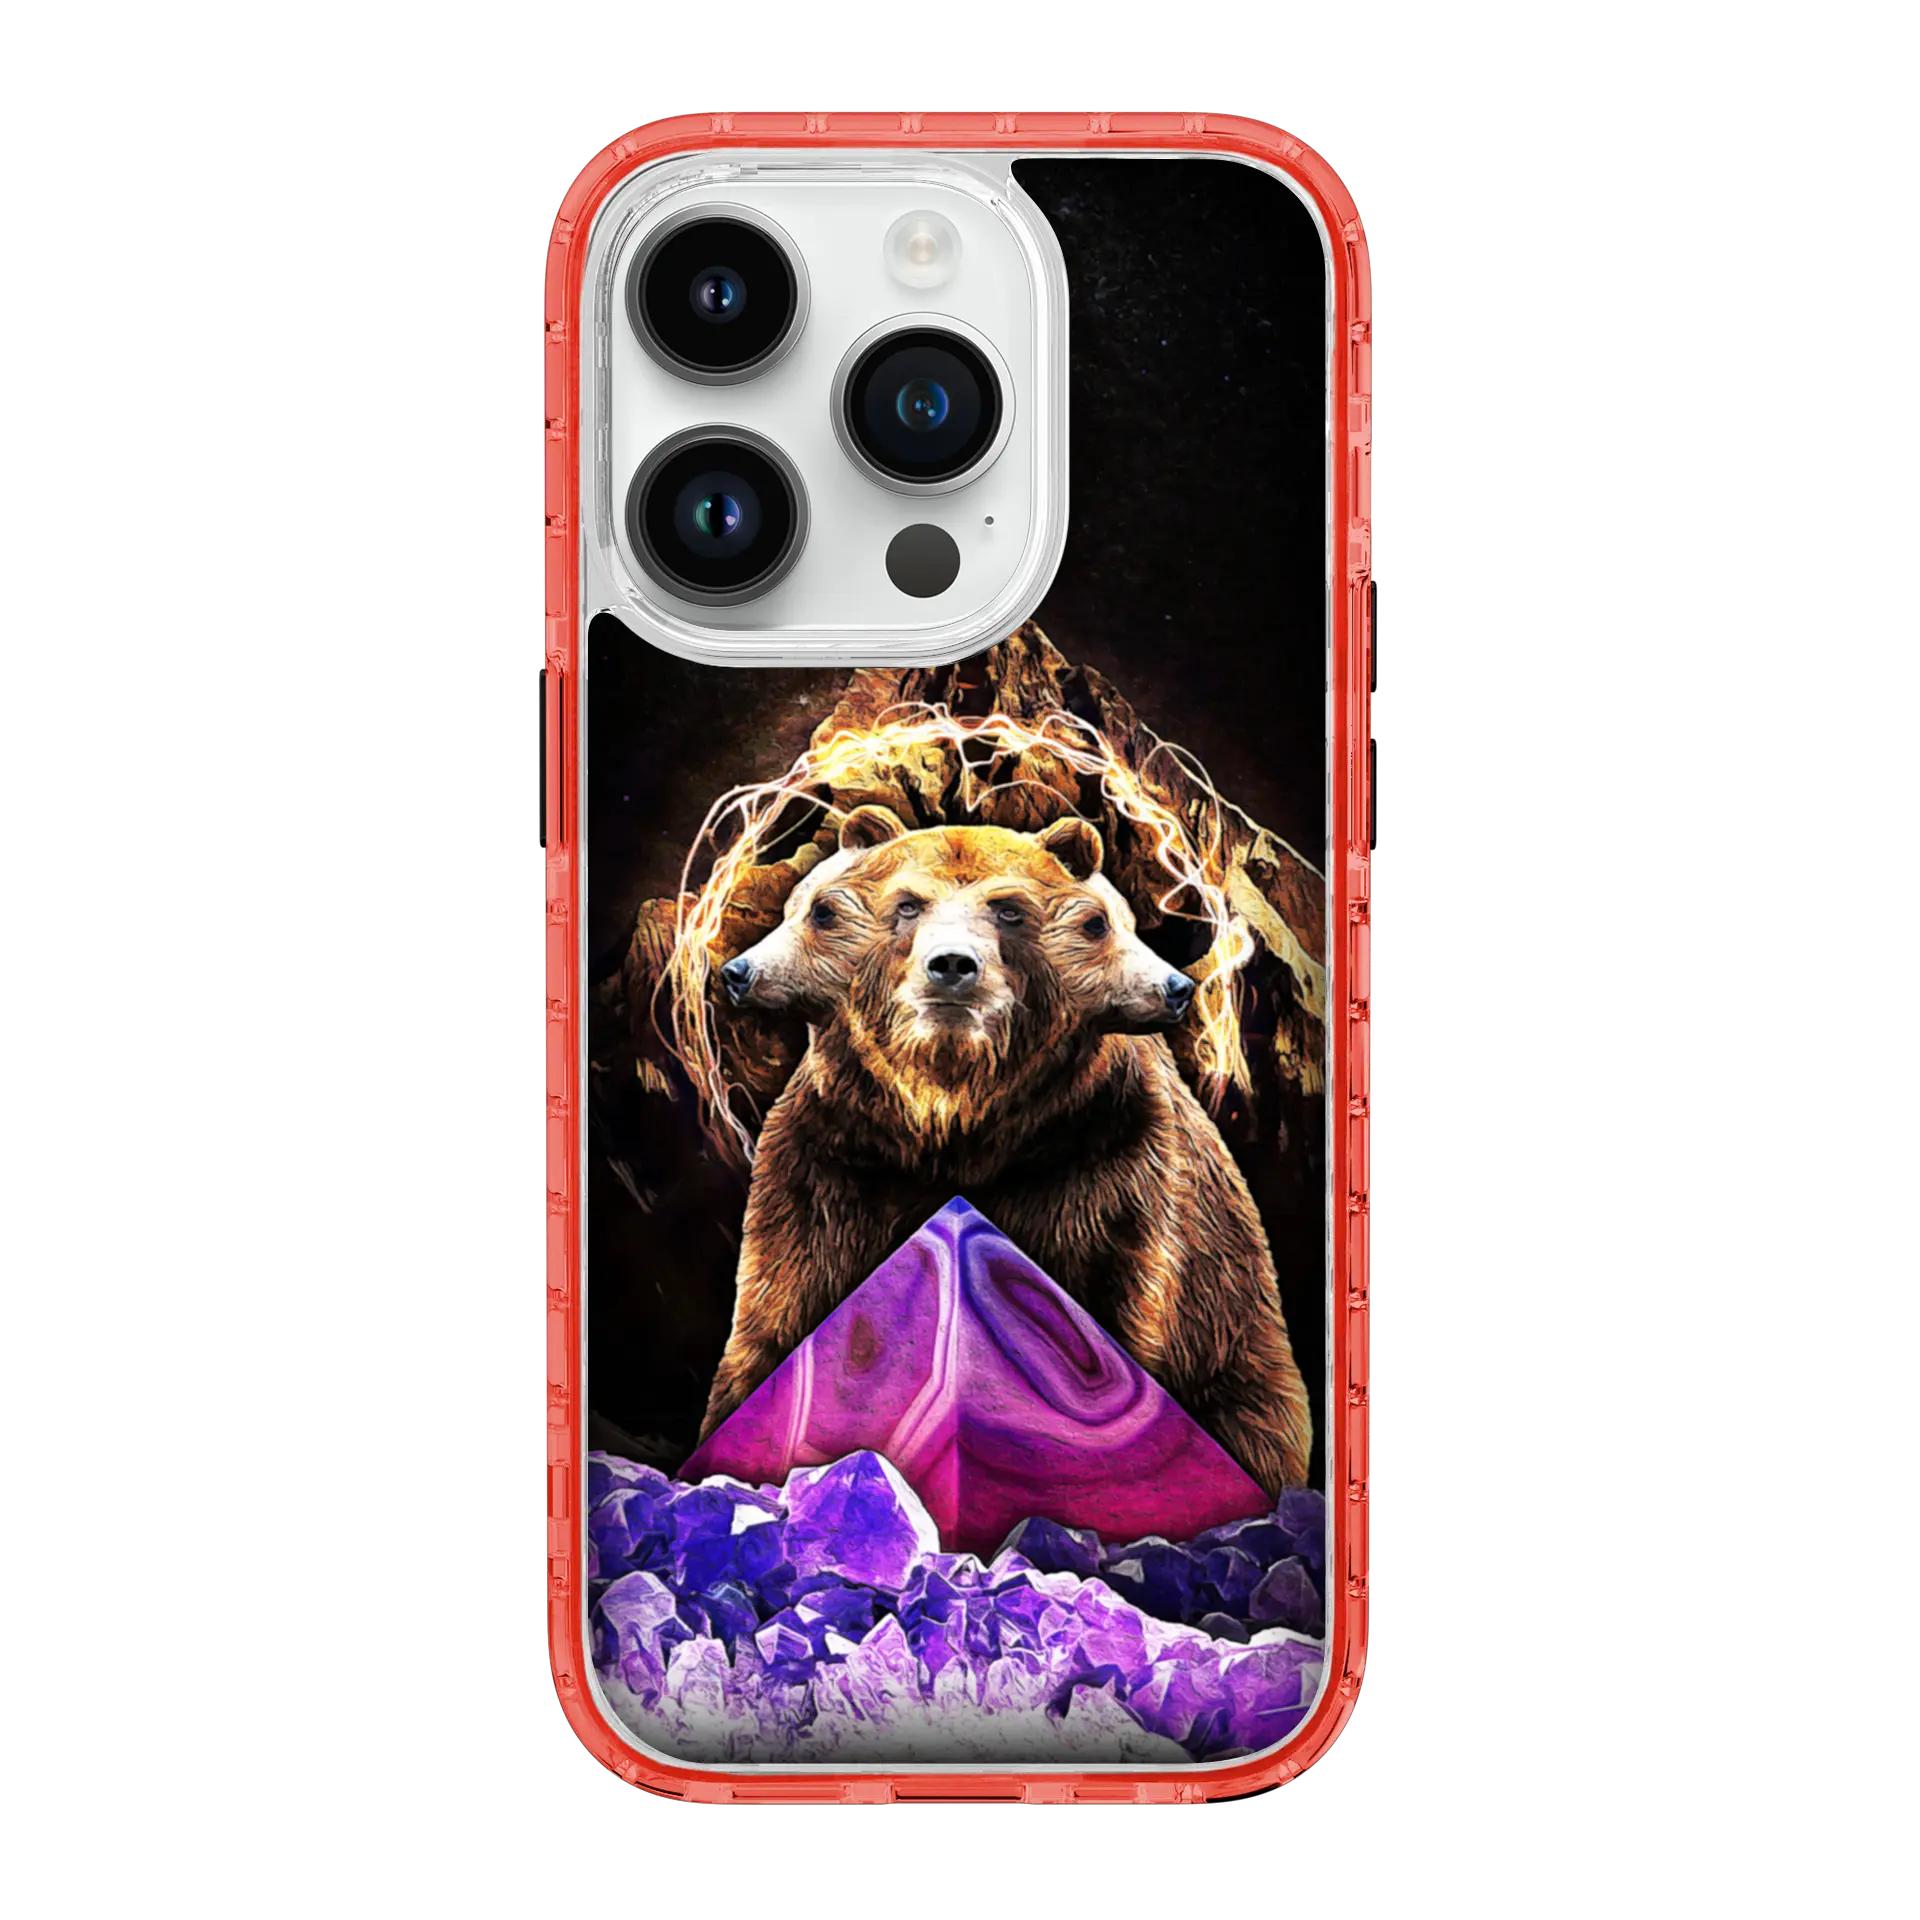 AppleiPhone14ProMaxTurboRed Grizzly Widsom | Wizards & Wyrms Series | Custom MagSafe Case Design for Apple iPhone 14 Series cellhelmet cellhelmet